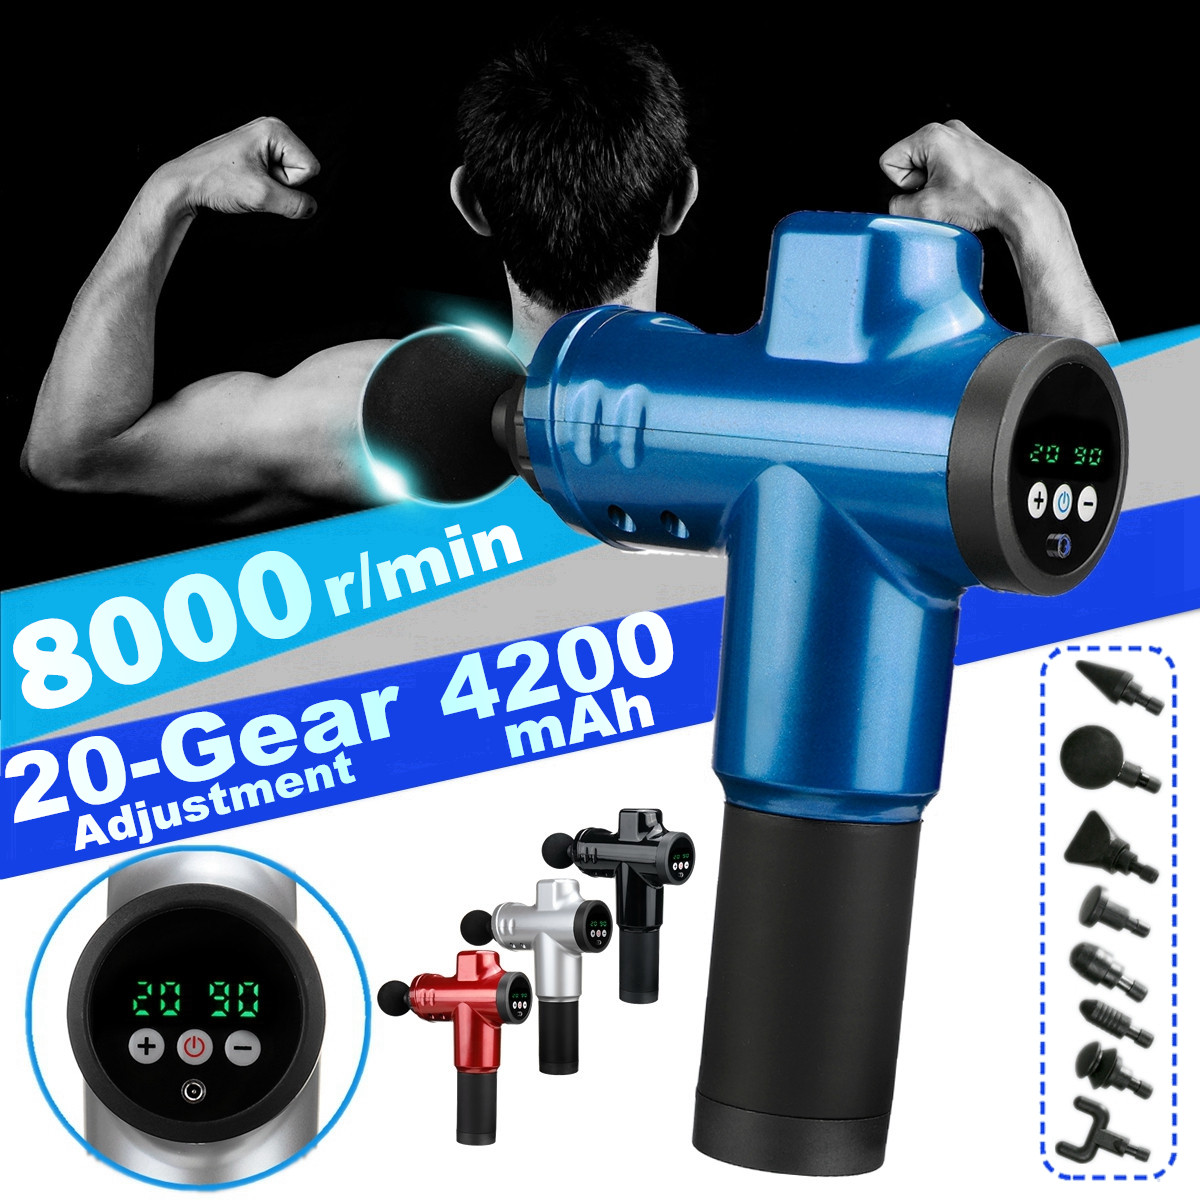 20-Gears-LED-USB-Electric-Percussion-Massager-Muscle-Vibrating-Pain-Relaxing-Therapy-Device-W-8-Head-1733315-1